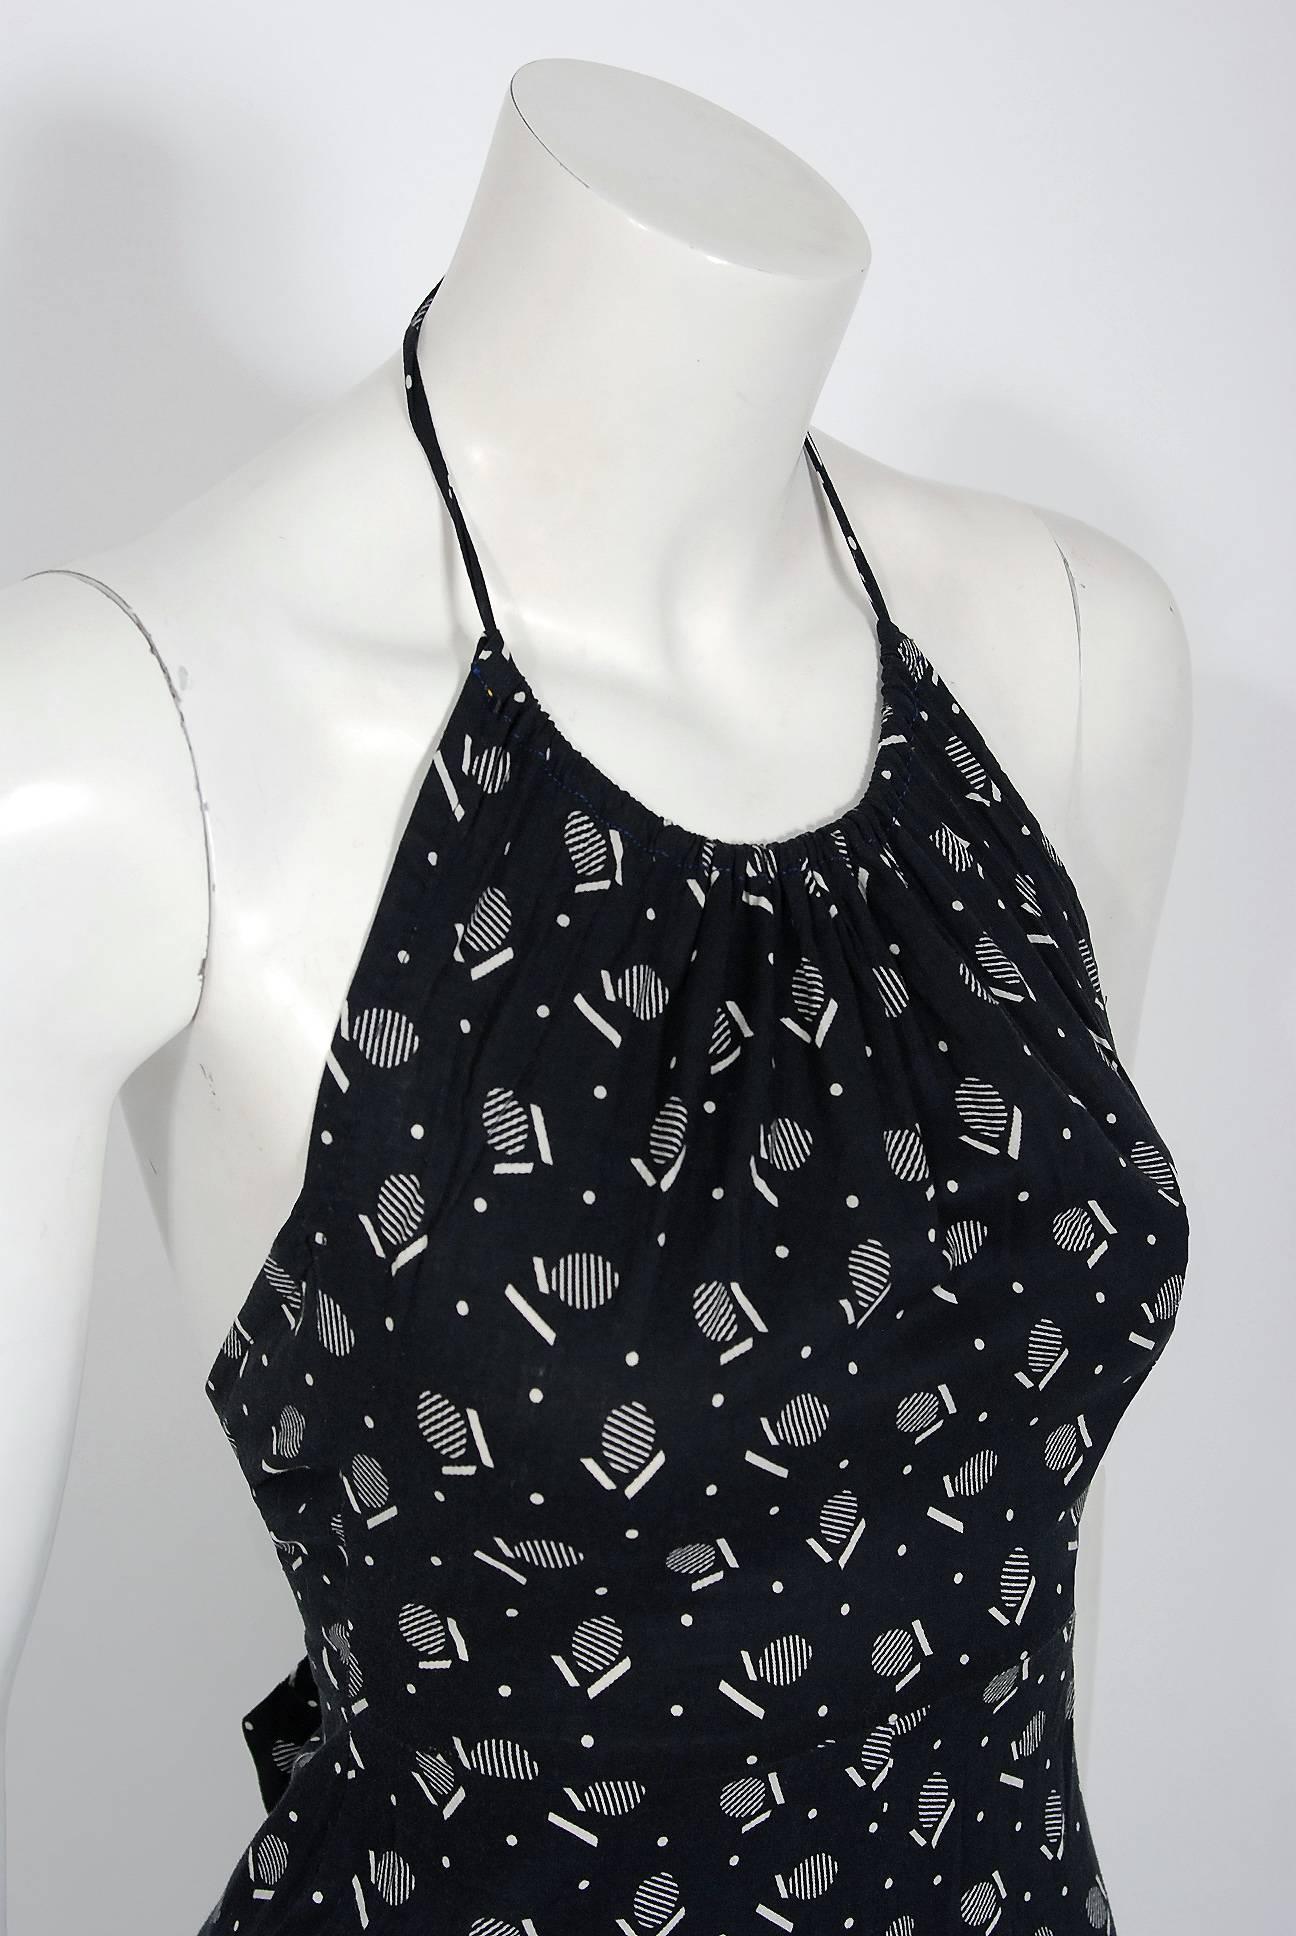 If you were an “It Girl” in London during the 1960's and 1970's, Biba is where you would have shopped. This beautiful black and white deco dots print sundress is a perfect example of the brand's genius. It is an easy-to-wear light weight cotton with